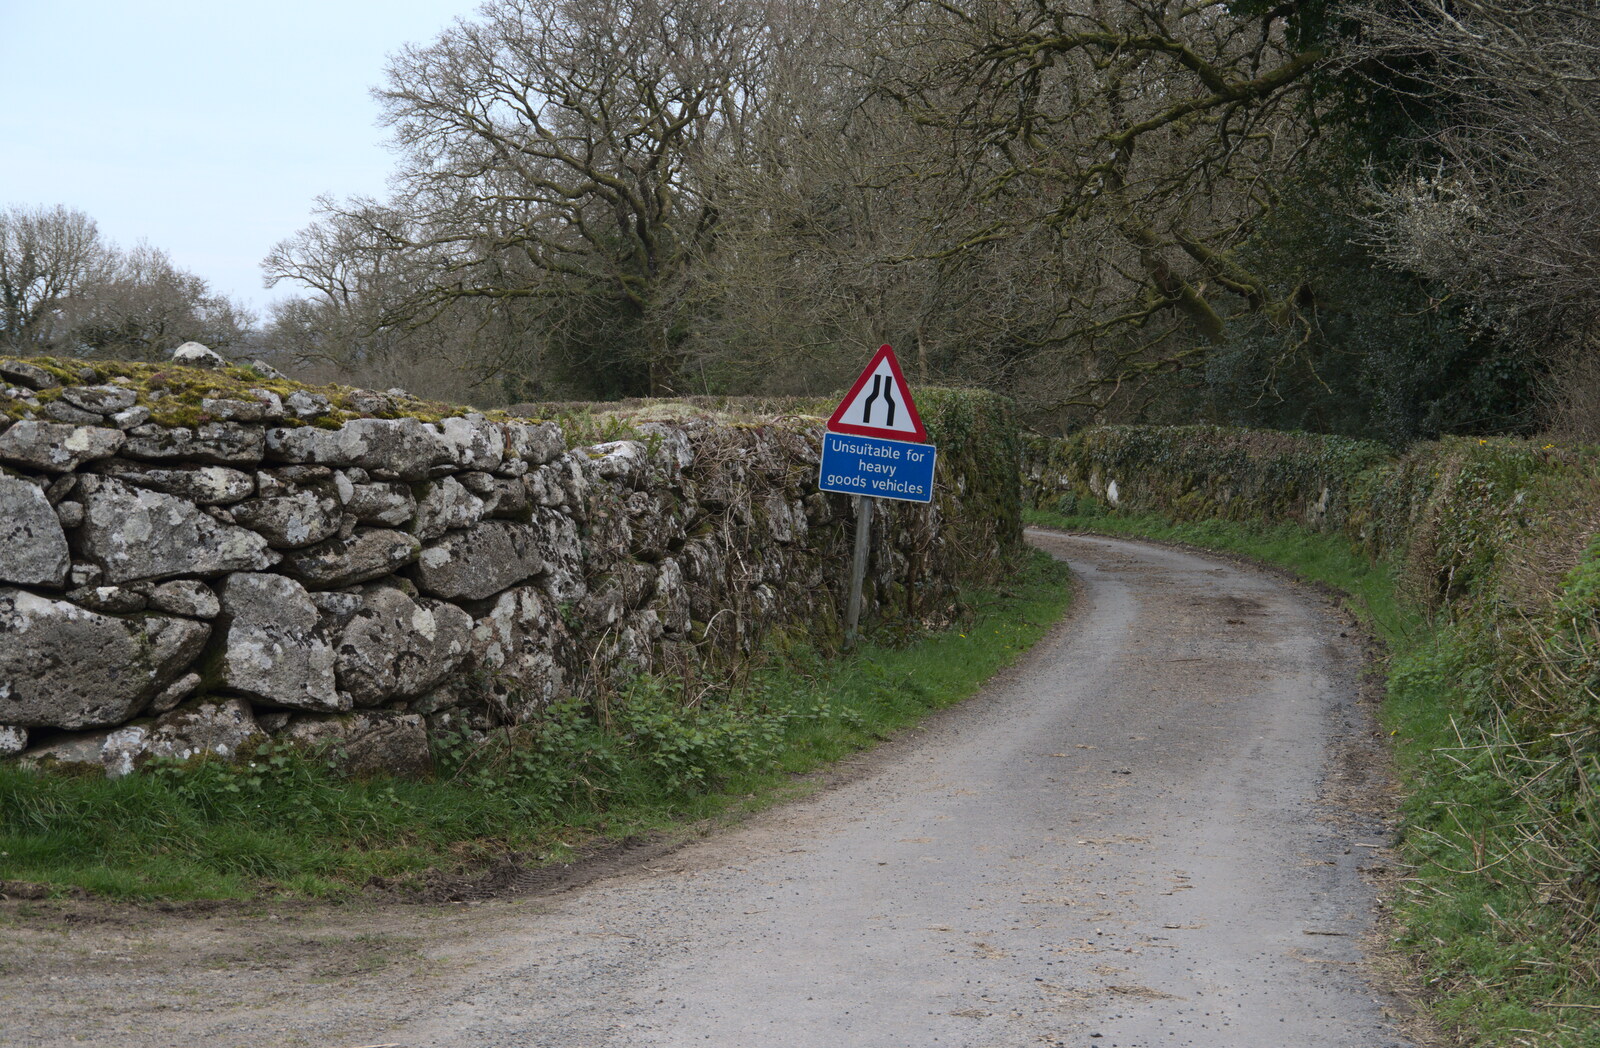 A Devon lane towards Gidleigh from Easter in South Zeal and Moretonhampstead, Devon - 9th April